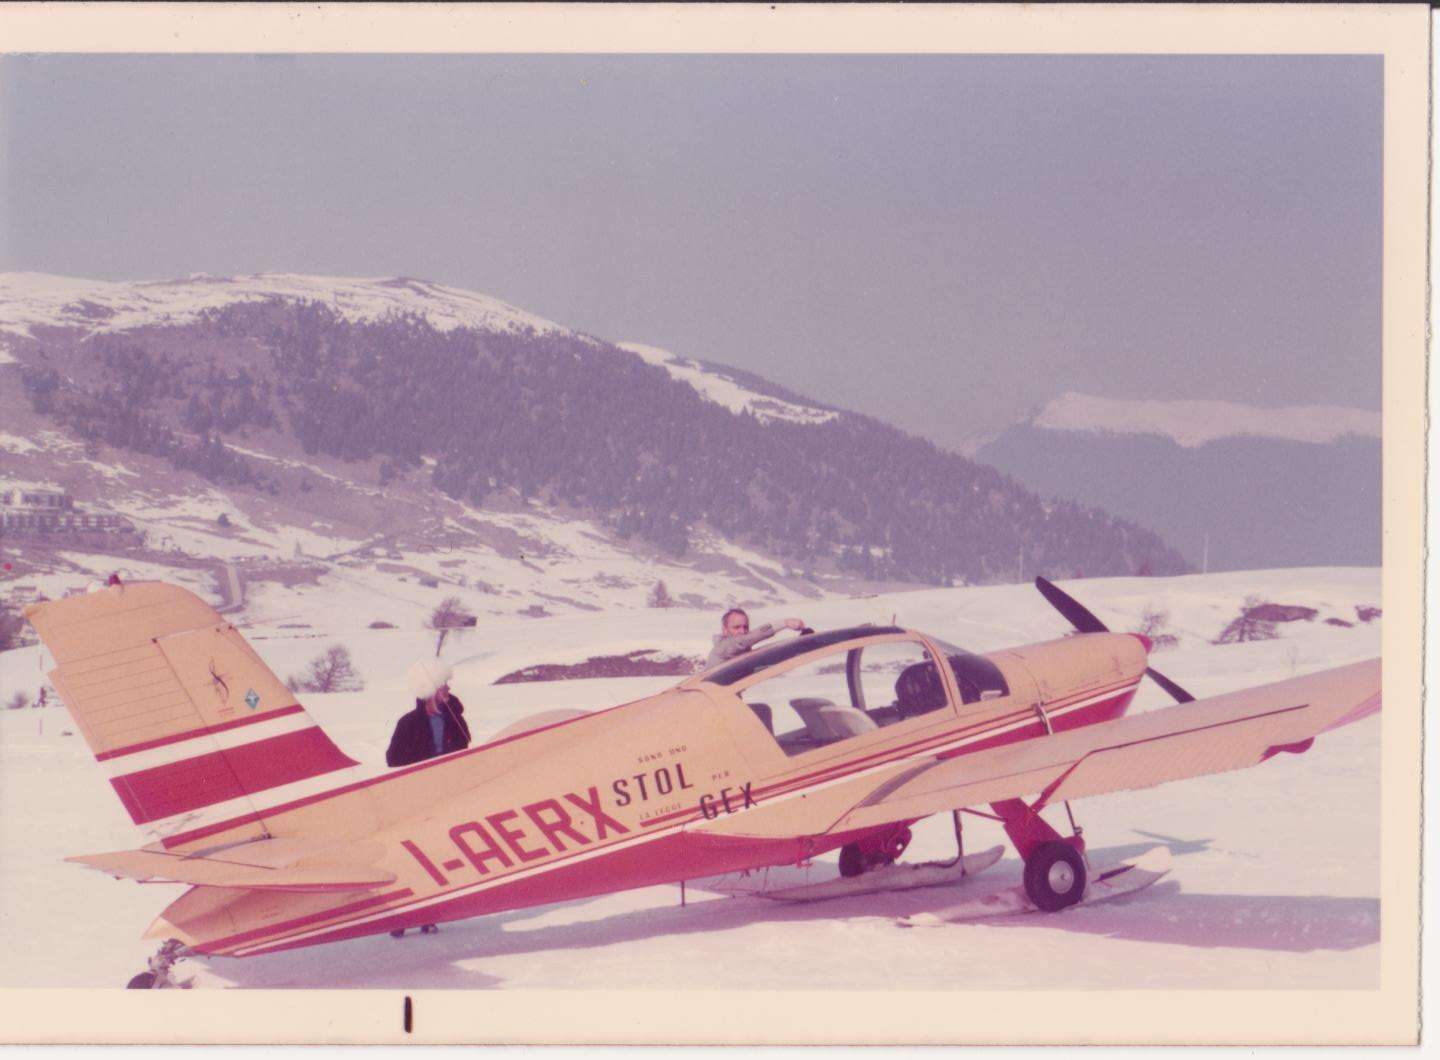 on the Susy Alps with a stol online puzzle